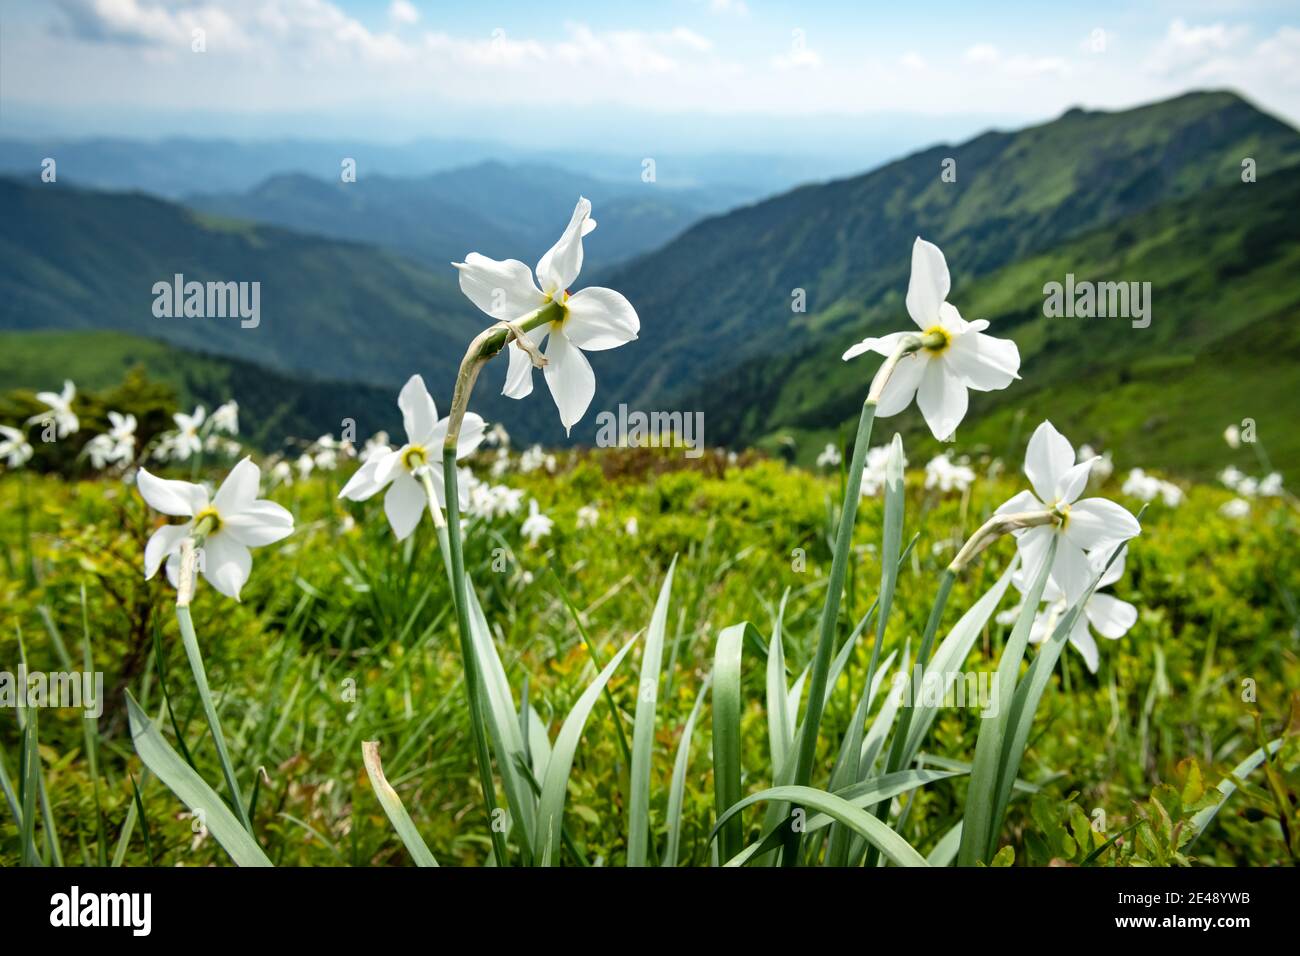 Mountain meadow covered with white narcissus flowers. Carpathian mountains, Europe. Landscape photography Stock Photo